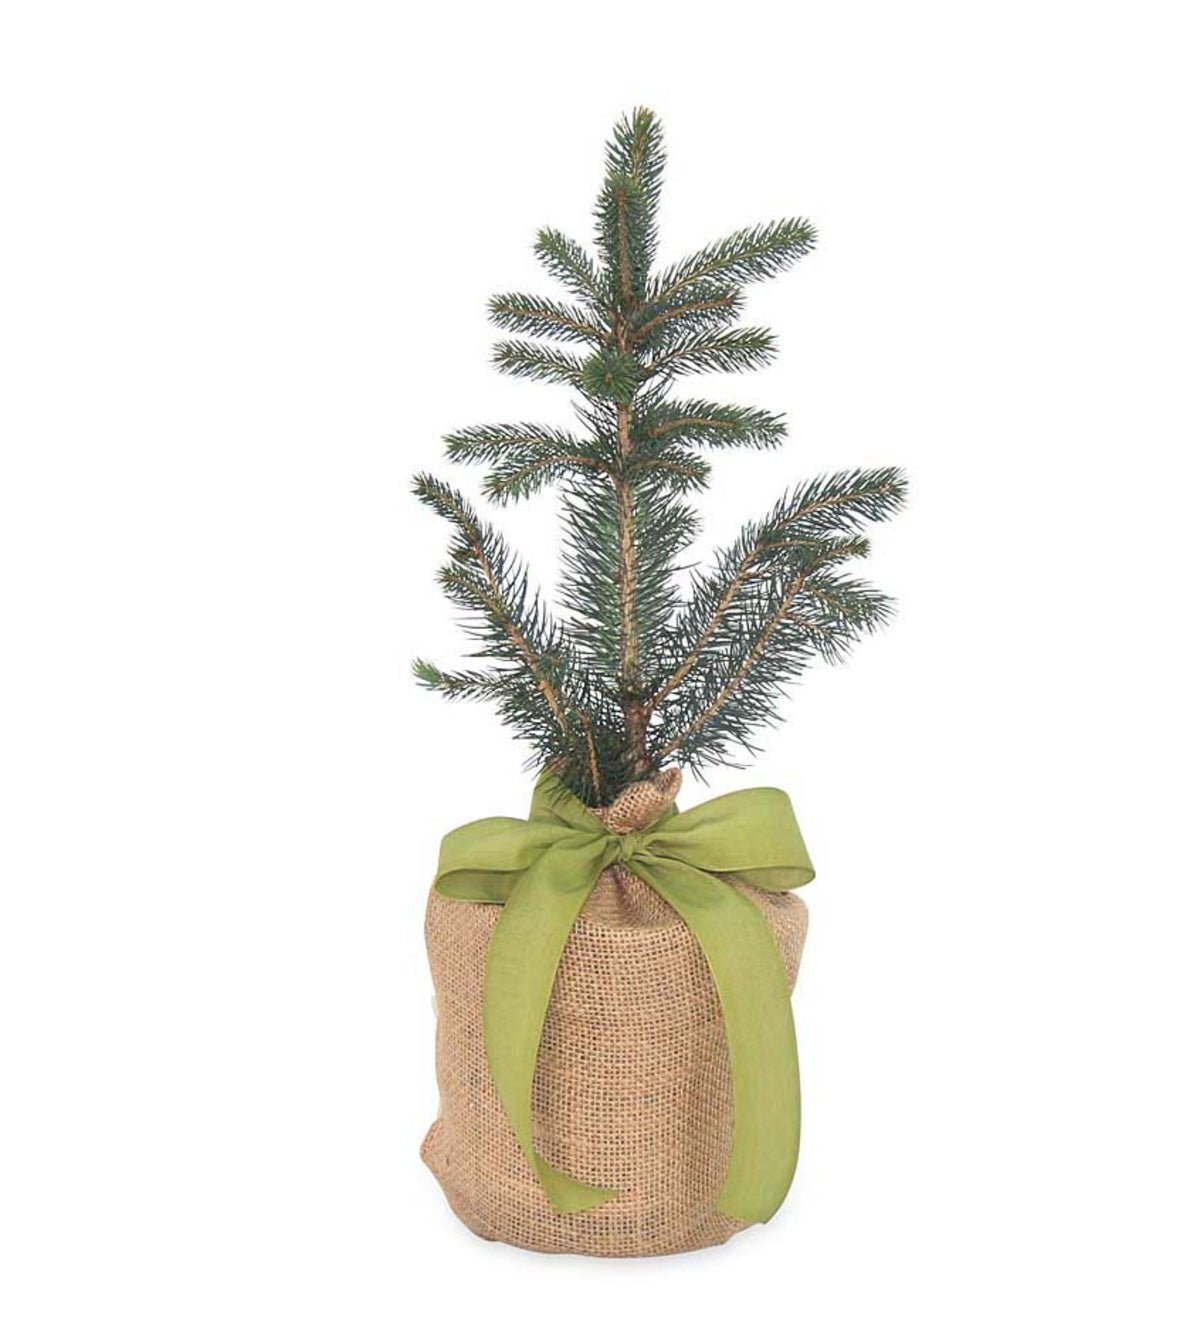 Live Potted Evergreen Trees in Burlap Gift Bag - Colorado Blue Spruce ...